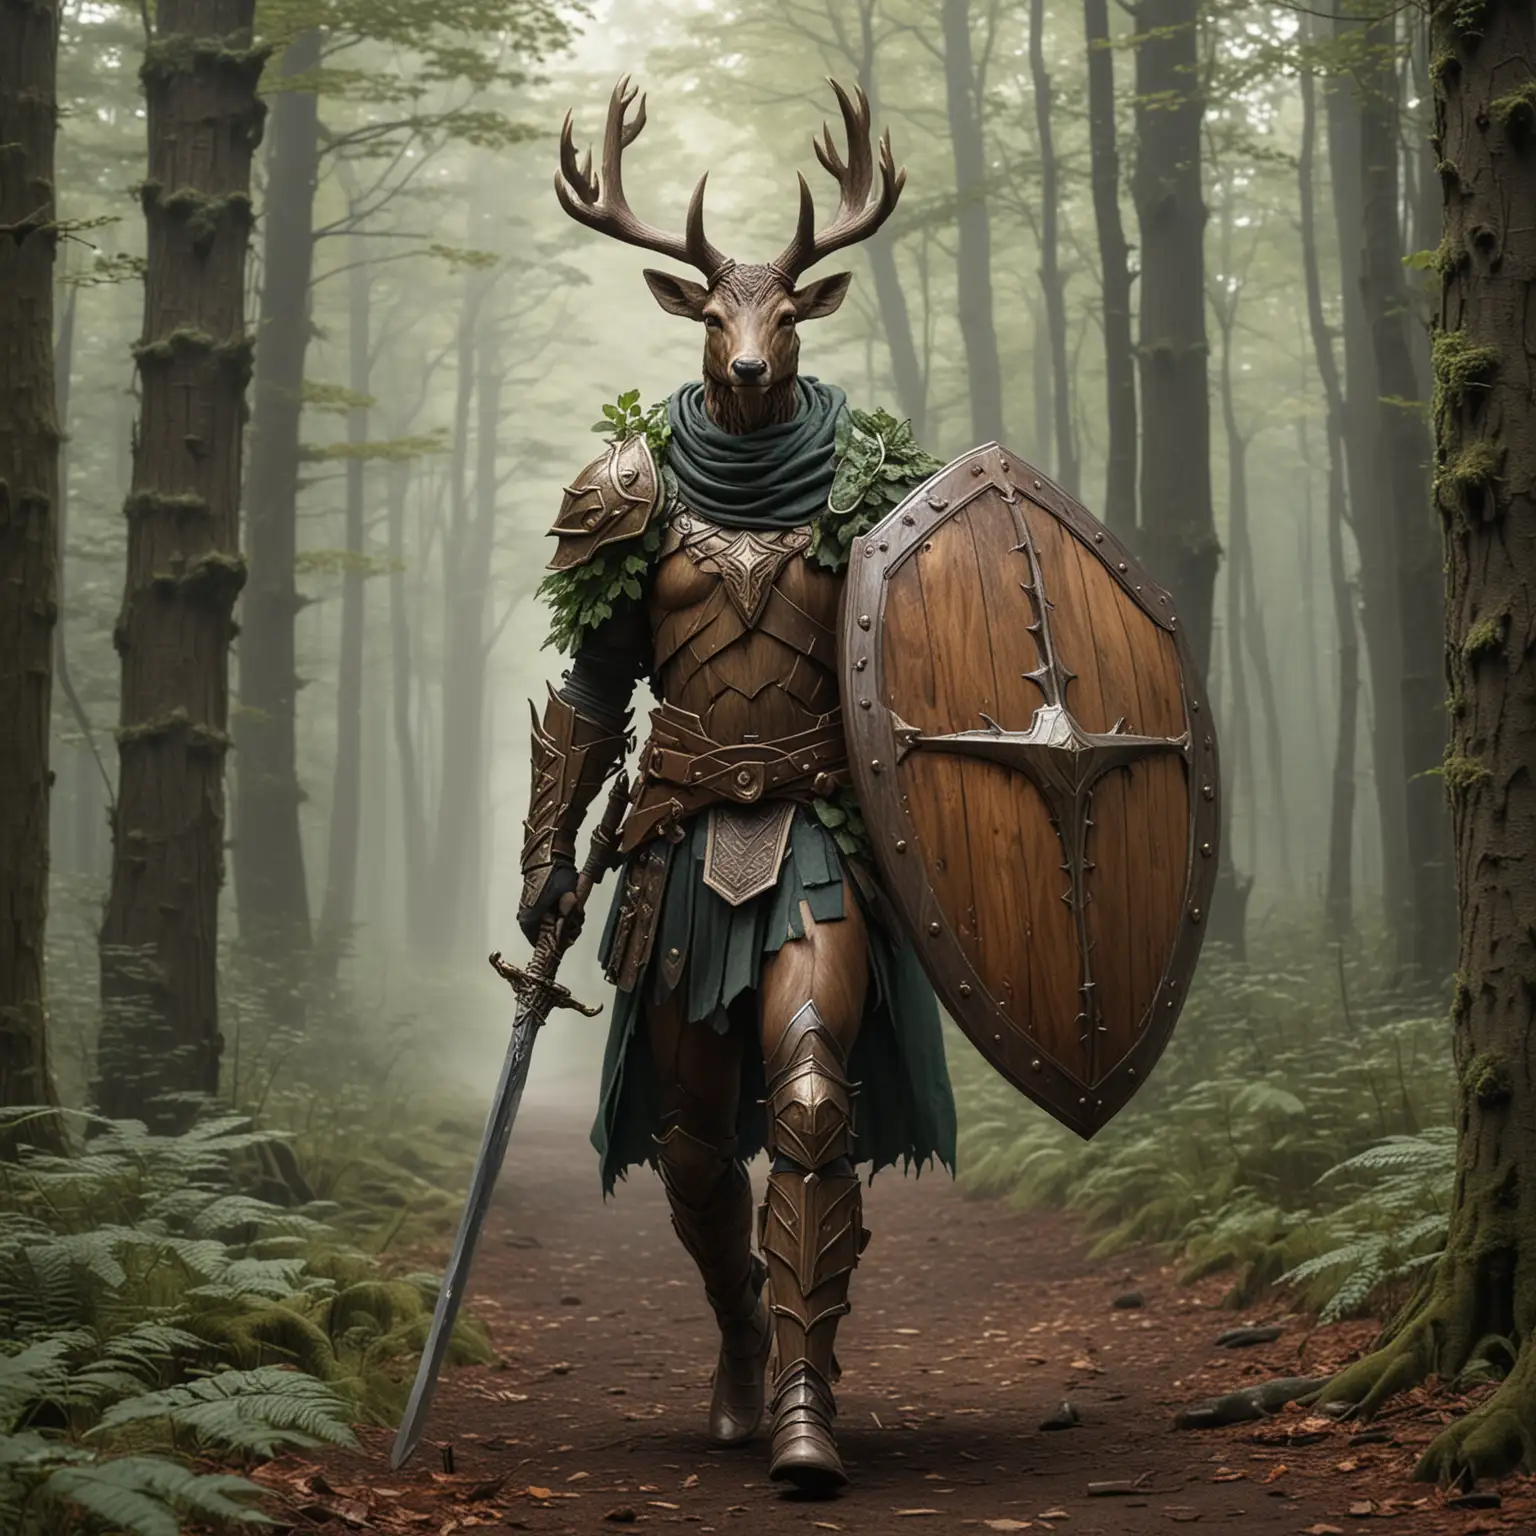 Majestic Deer Paladin Wielding Wooden Shield and Sword in Enchanted Forest